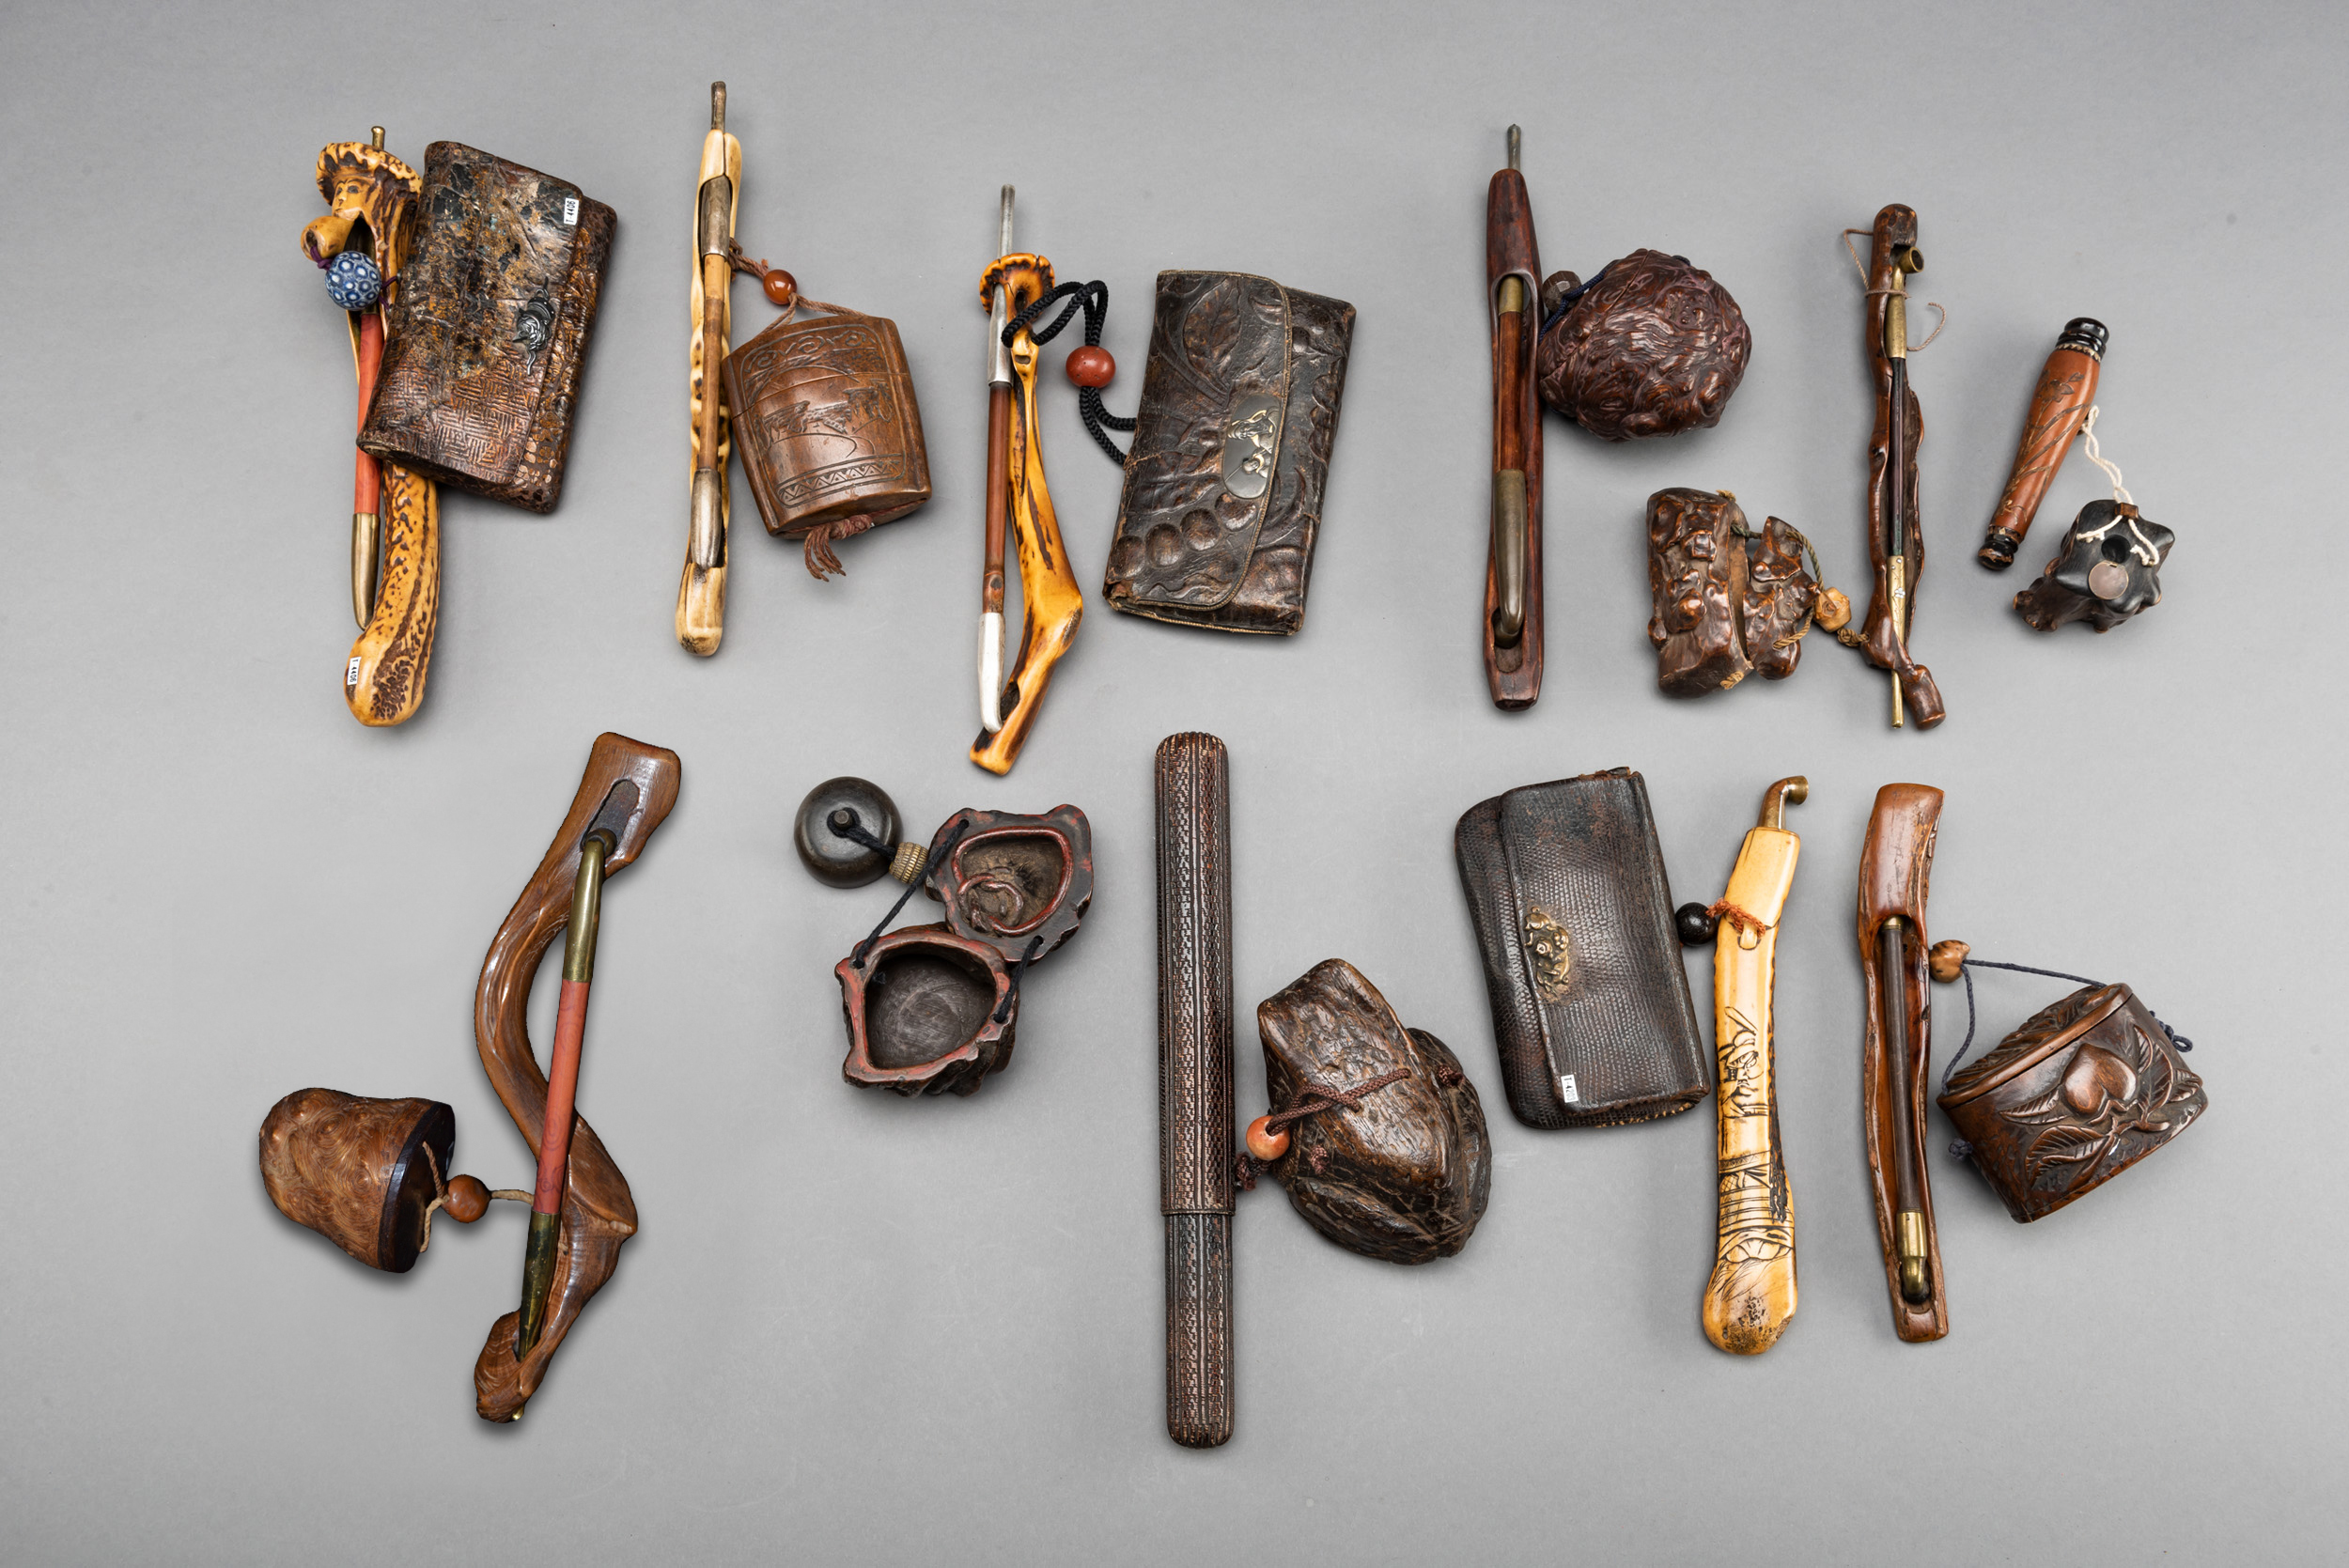 A Fine Collection of Japanese Smoking Implements from the 19th Century